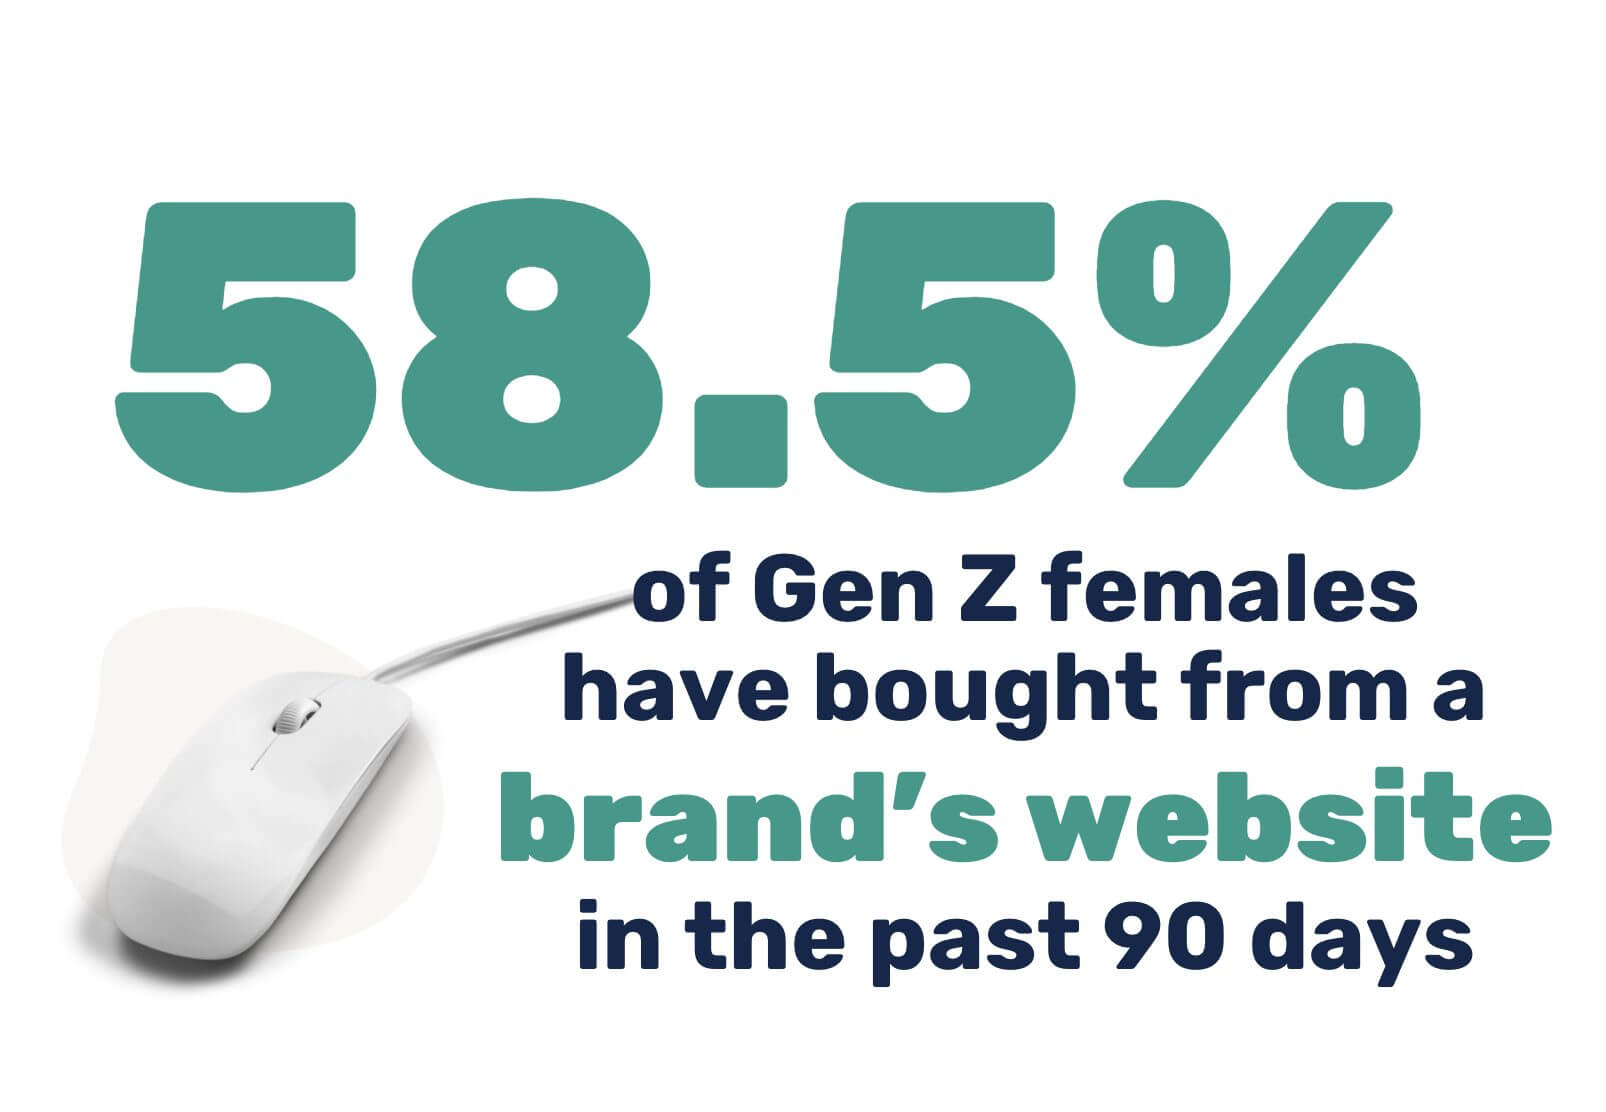 58.5% of Gen Z females have bought from a brand's website in the past 90 days